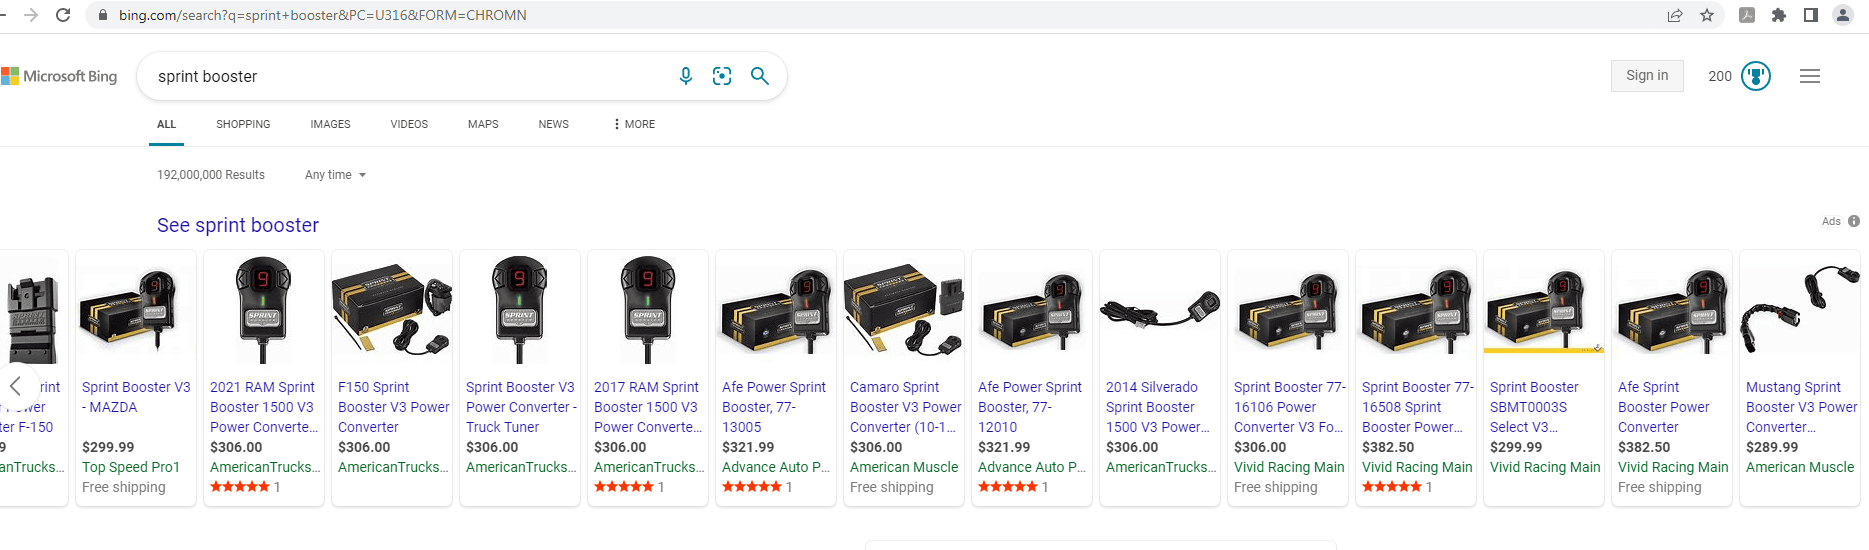 Sprint Booster Prices-7.18.22.PNG